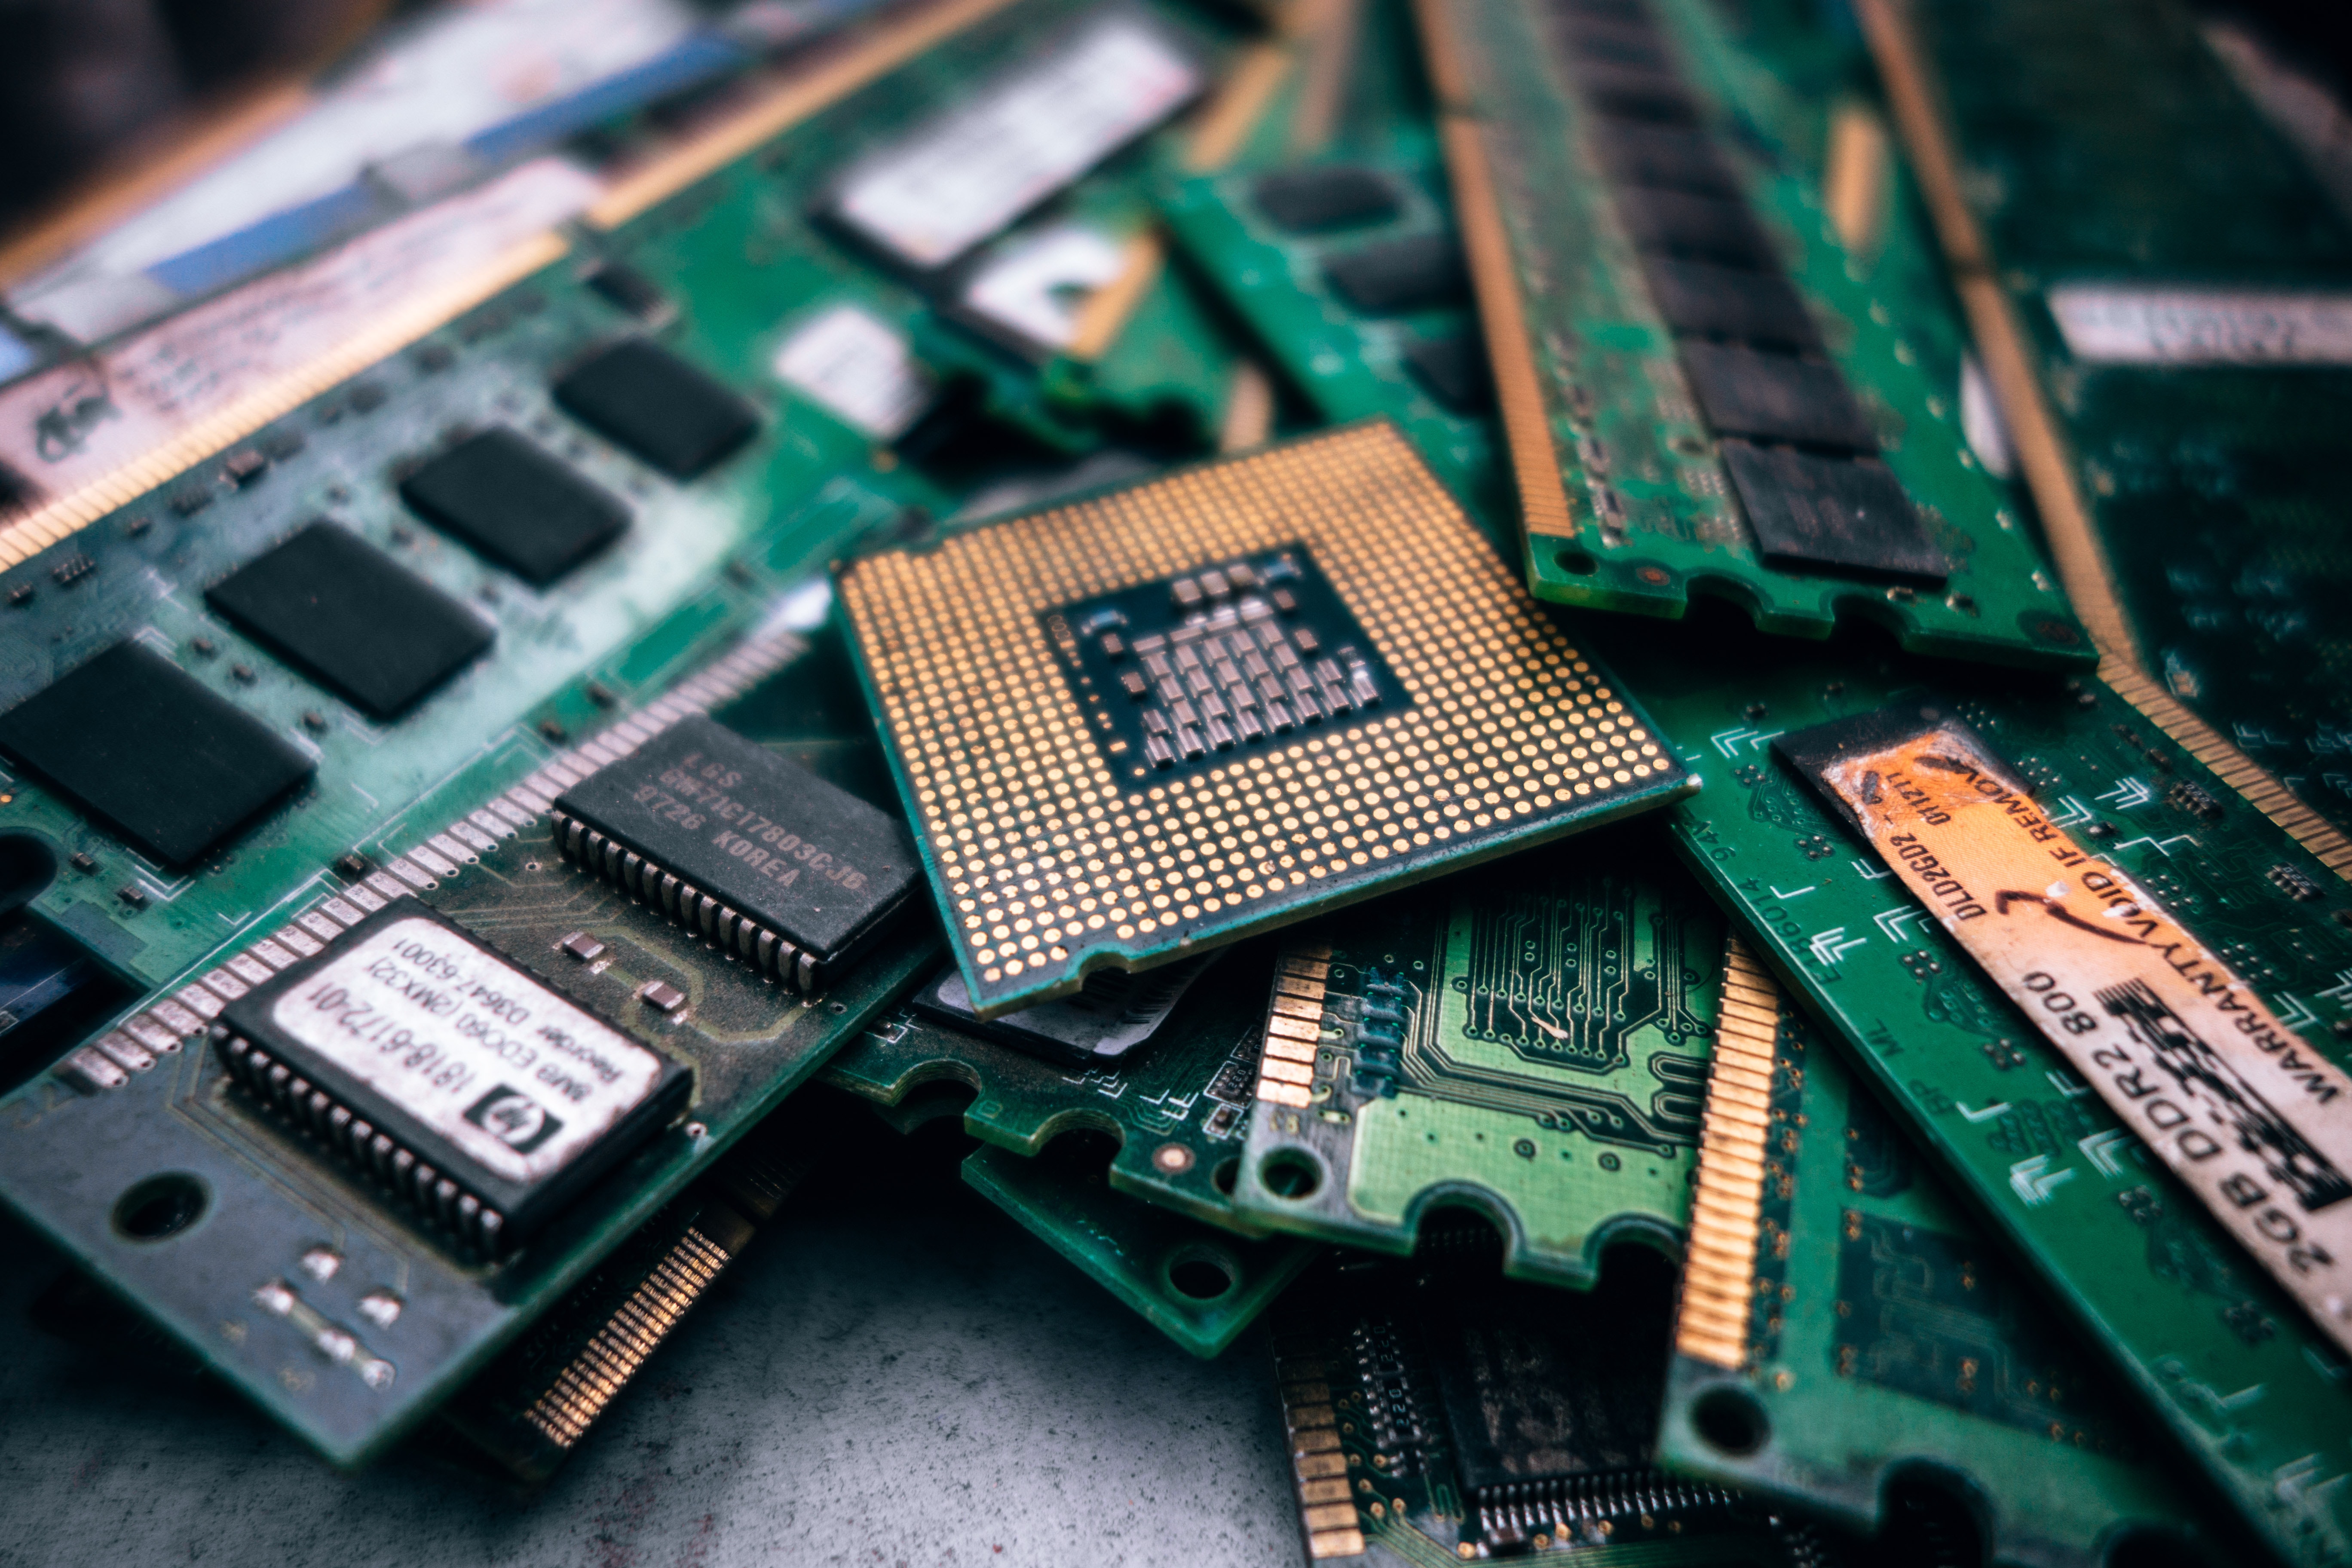 E-waste services and cleanup